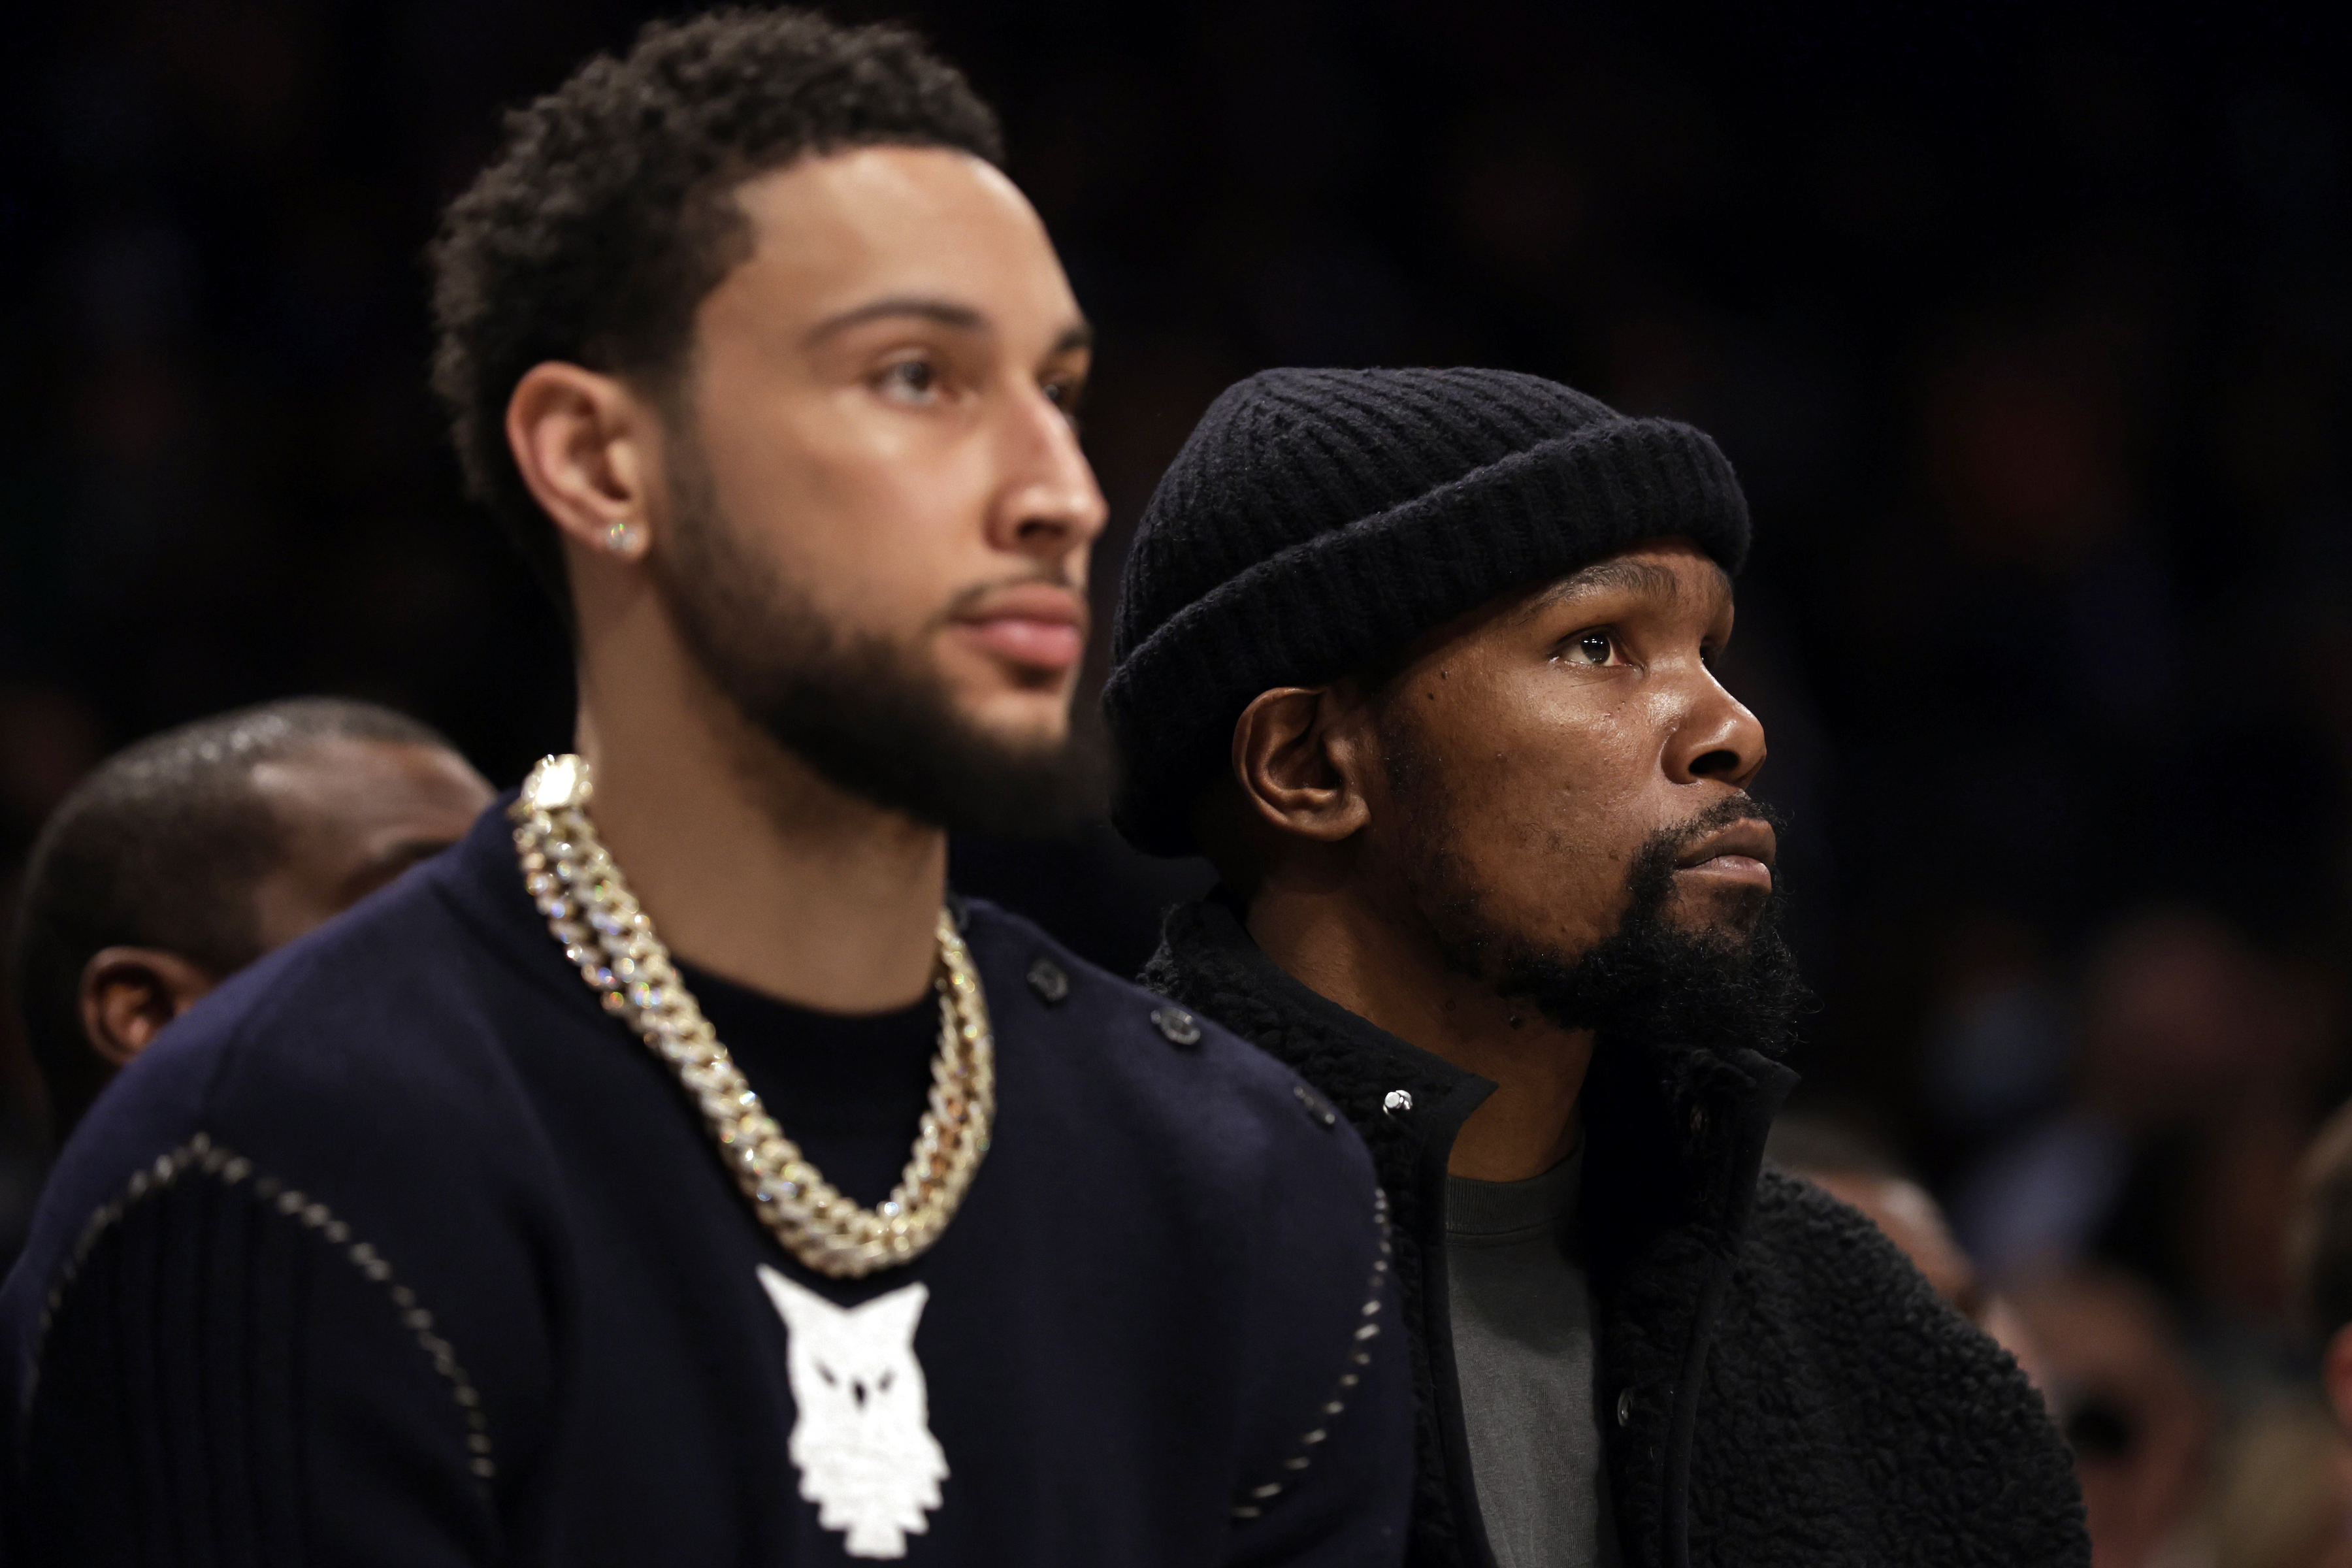 Brooklyn Nets stars Kevin Durant (R) and Ben Simmons (L) look on during an NBA game in February 2022